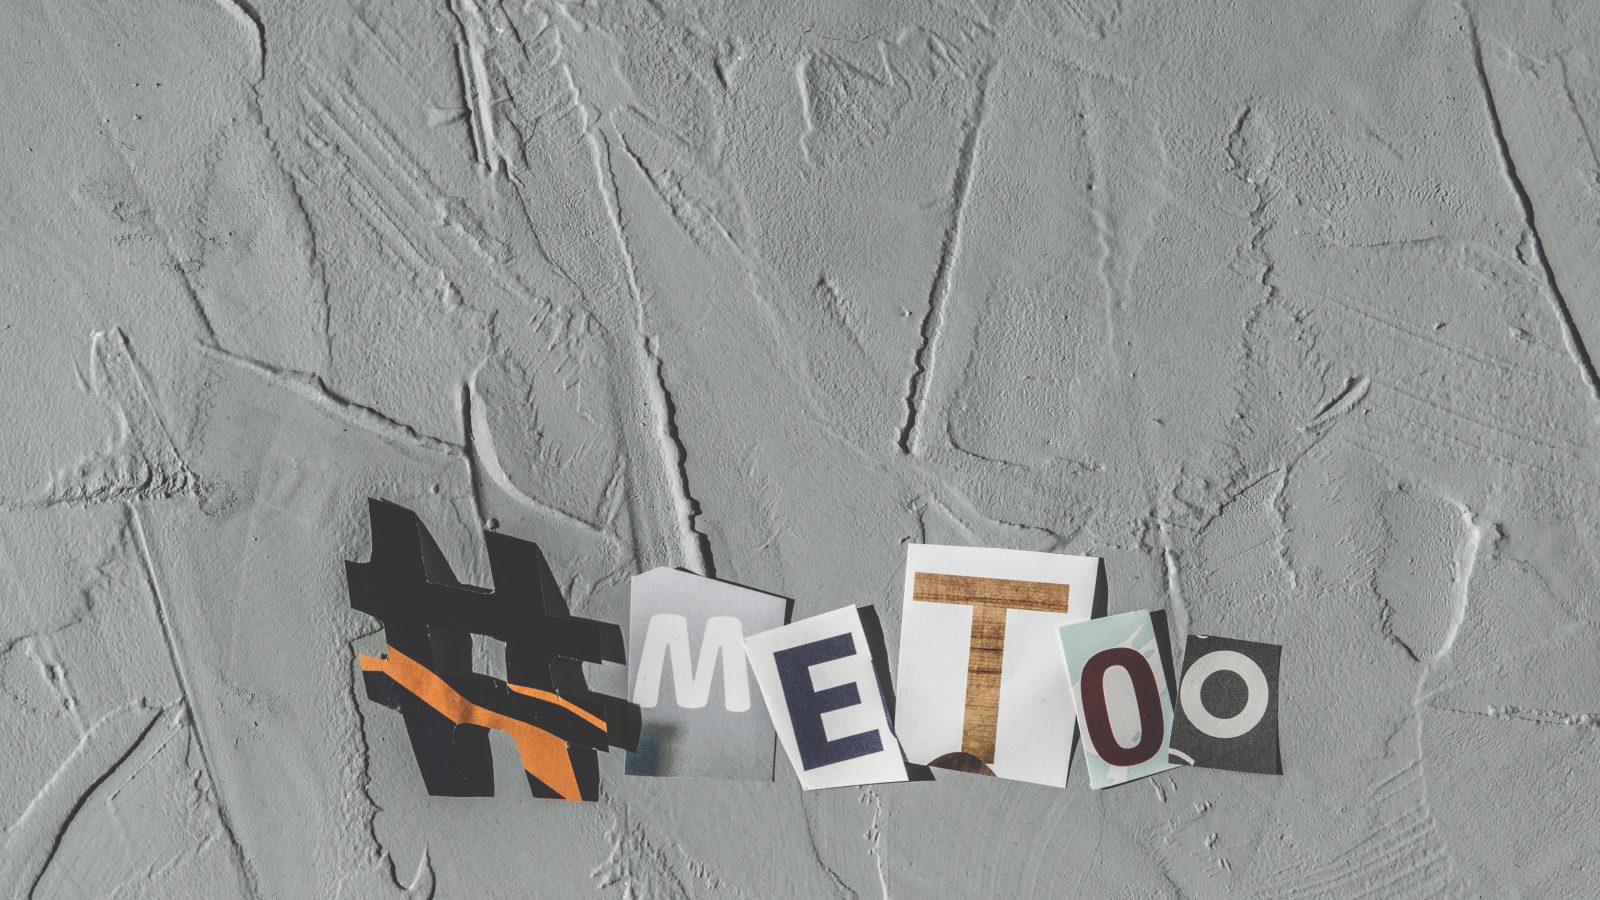 the phrase # Me Too spelled out in cut out letters